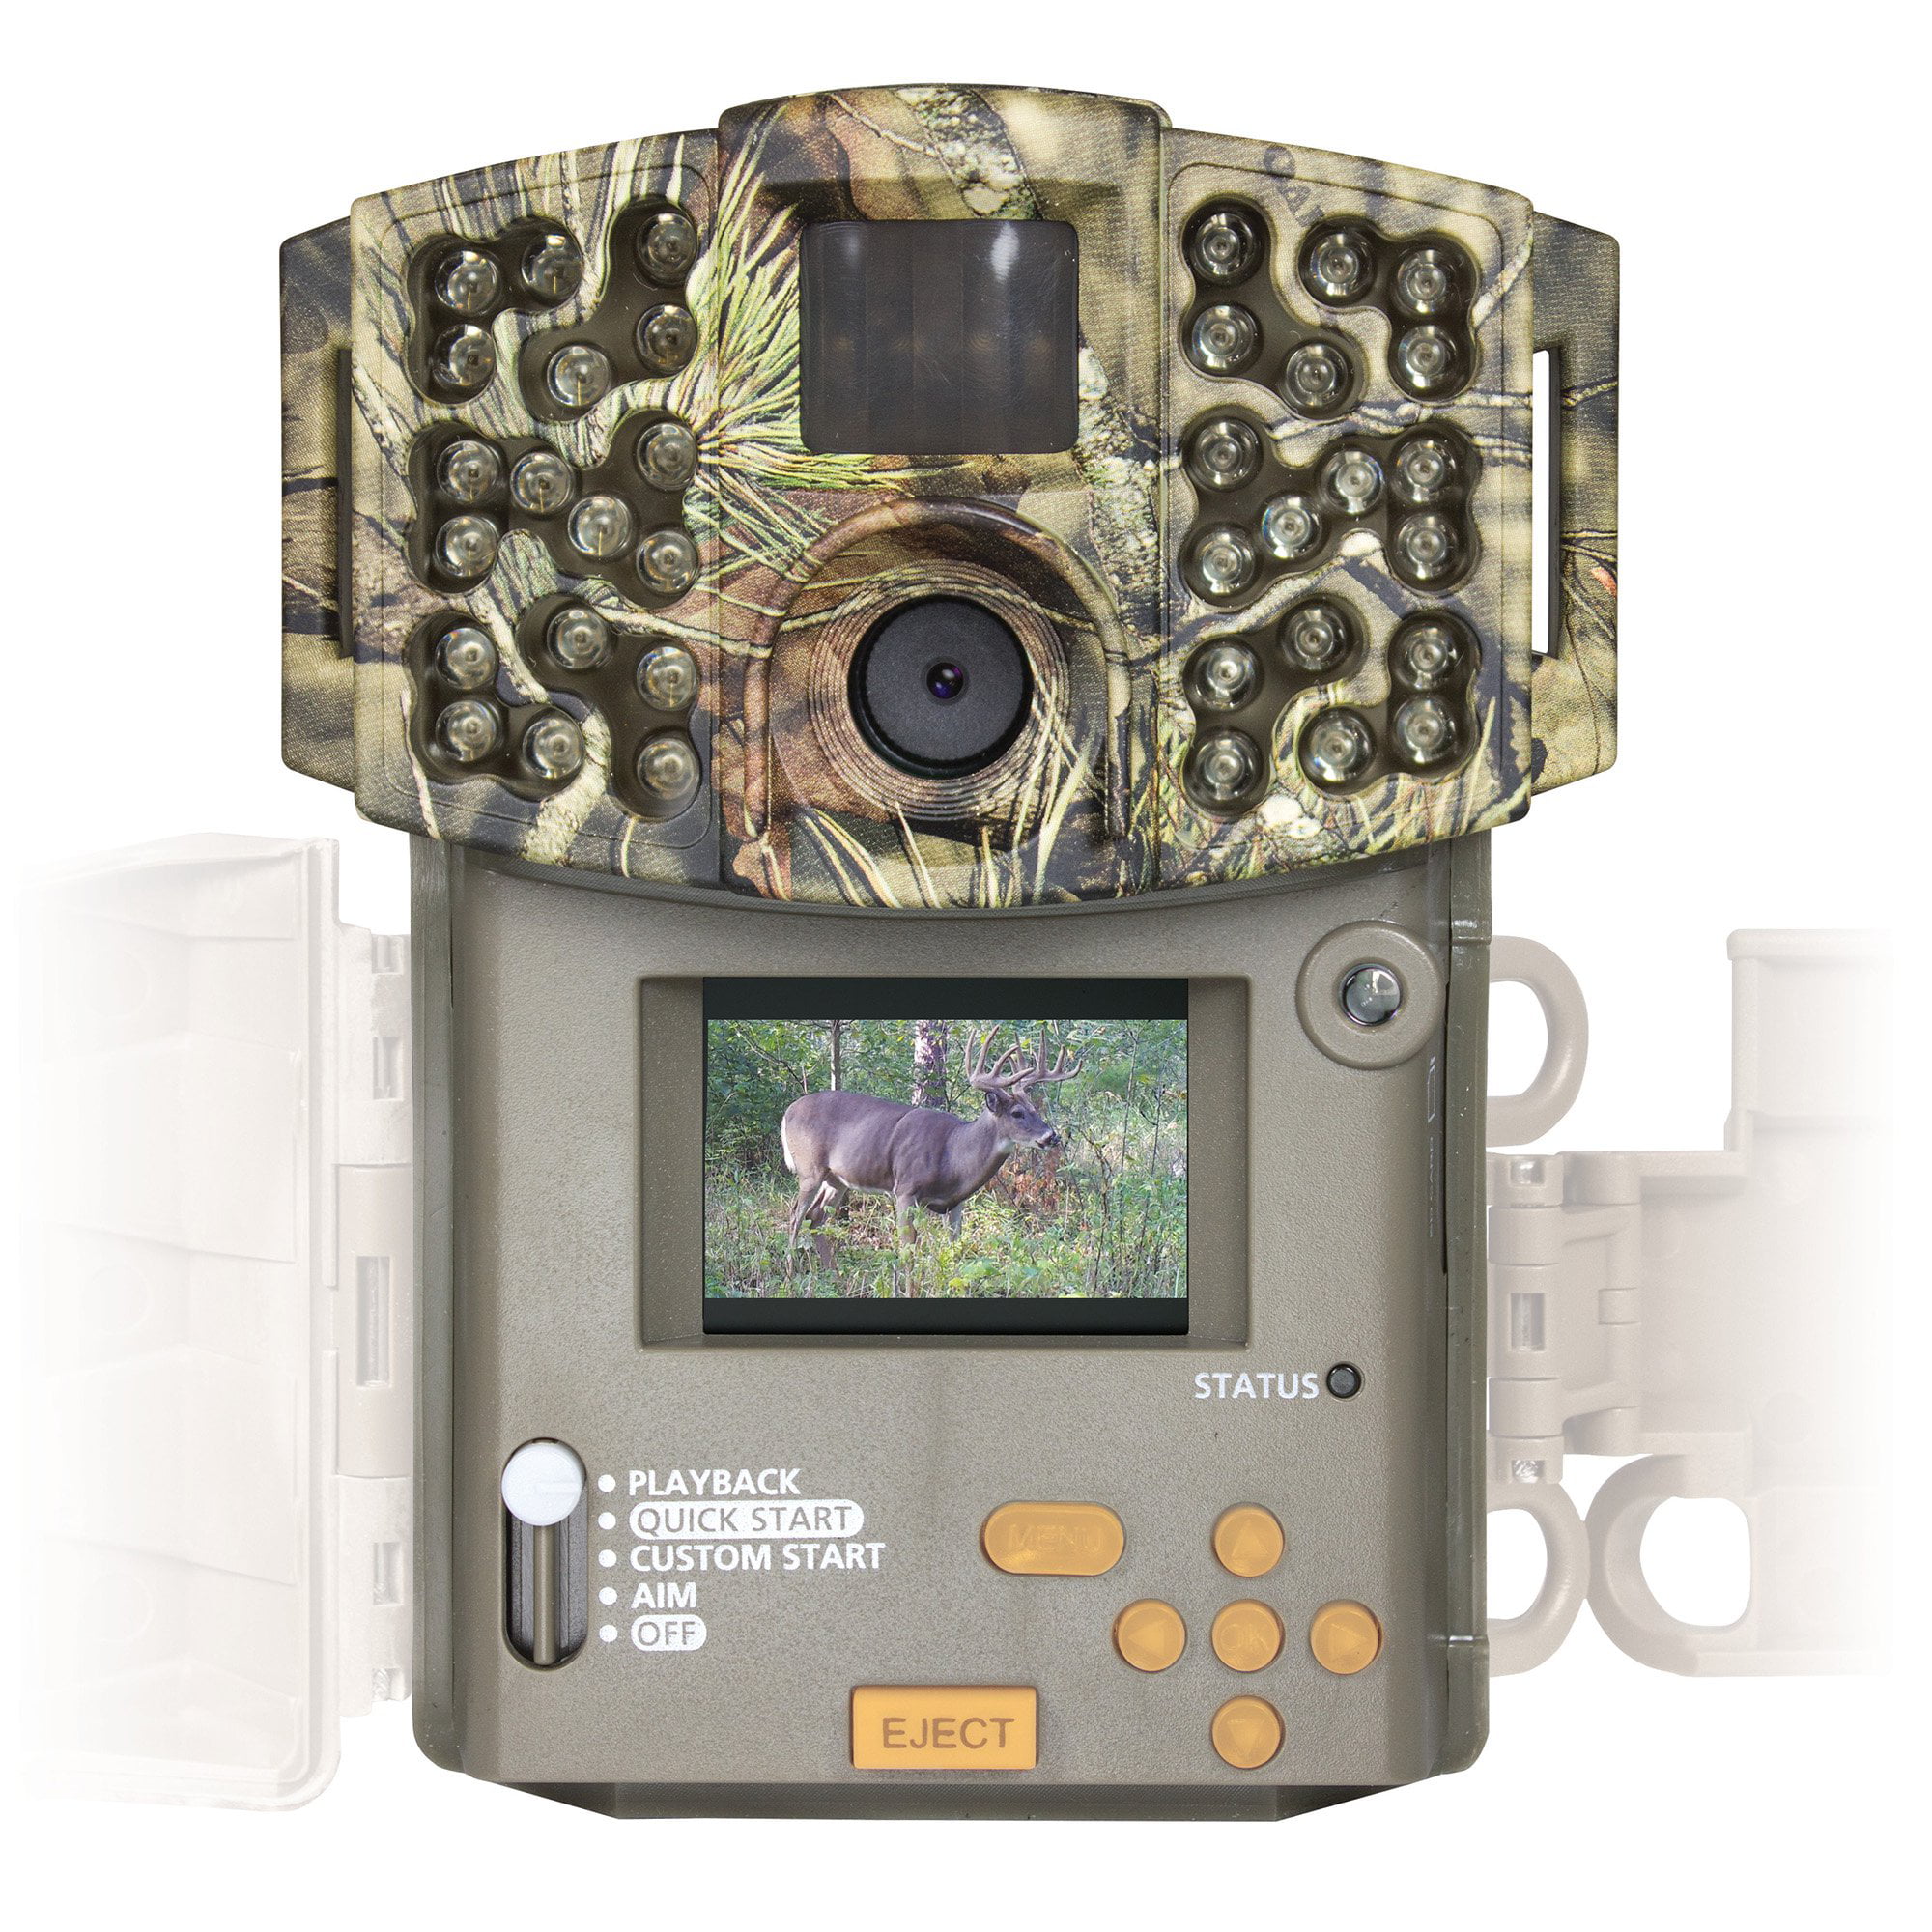 Moultrie No Glow Invisible 20mp Mini 999i IR Game Camera W/ Security Case for sale online 